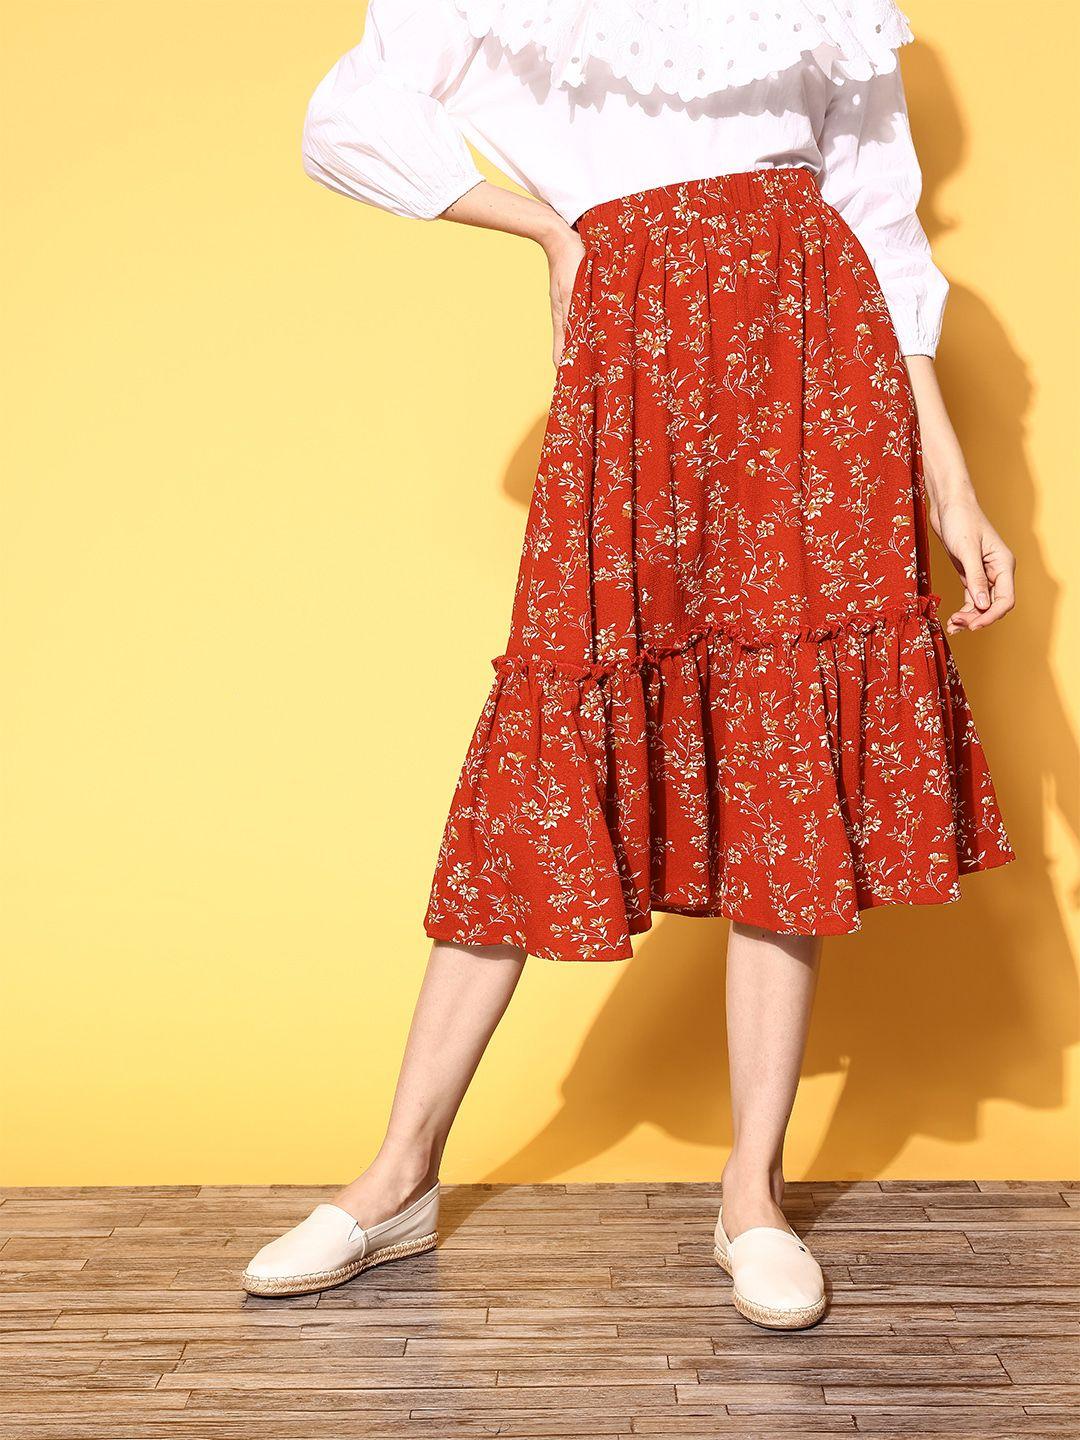 berrylush-attractive-red-floral-indie-gal-skirt